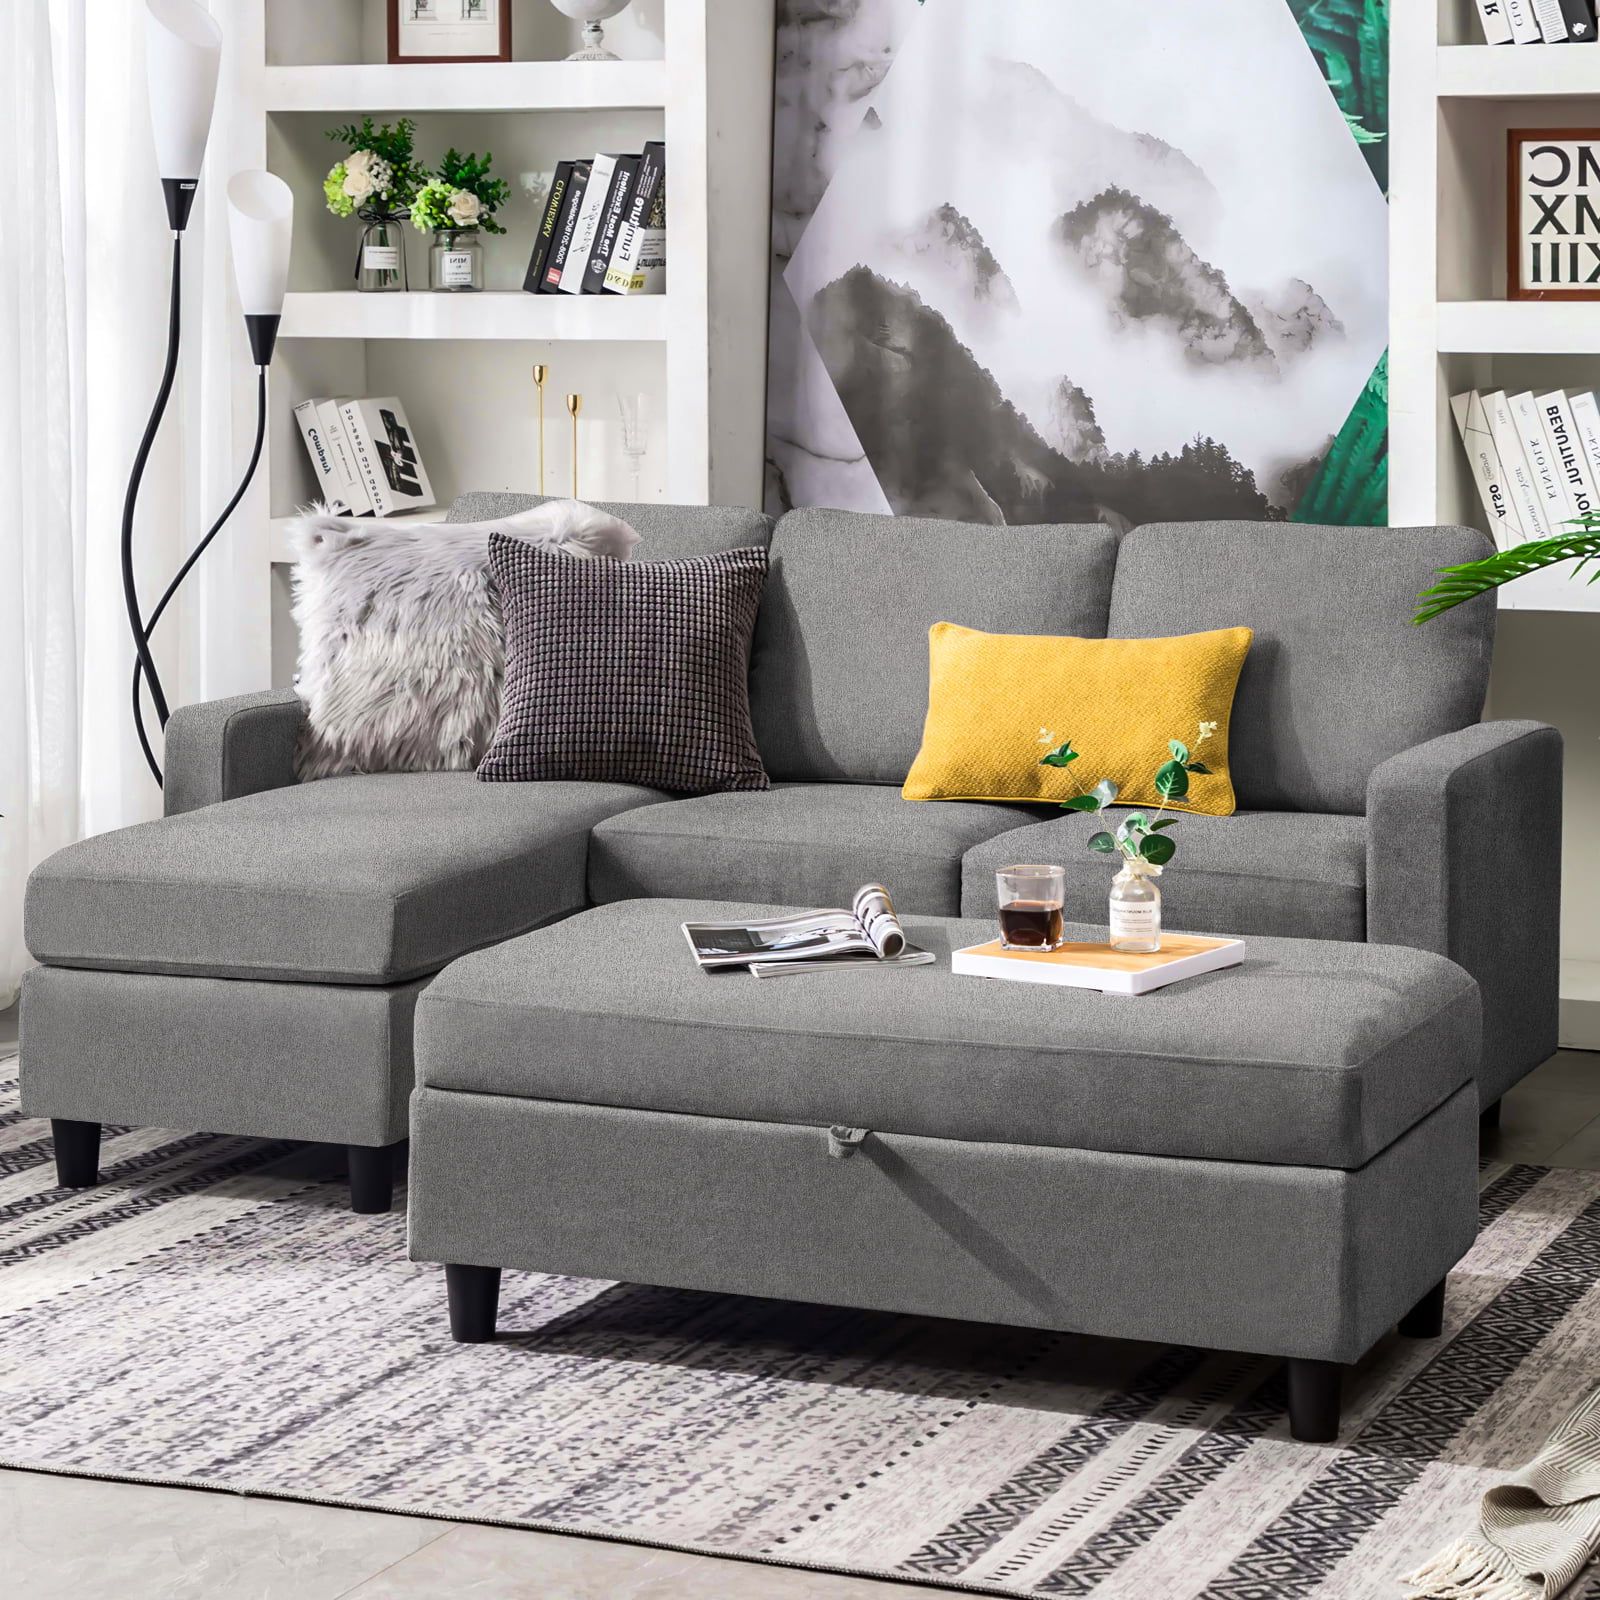 Honbay Convertible Sectional Sofa Set L Shaped Couch With Chaise & Ottoman  For Small Spaces, Grey Polyester – Walmart Intended For L Shapped Apartment Sofas (View 3 of 20)